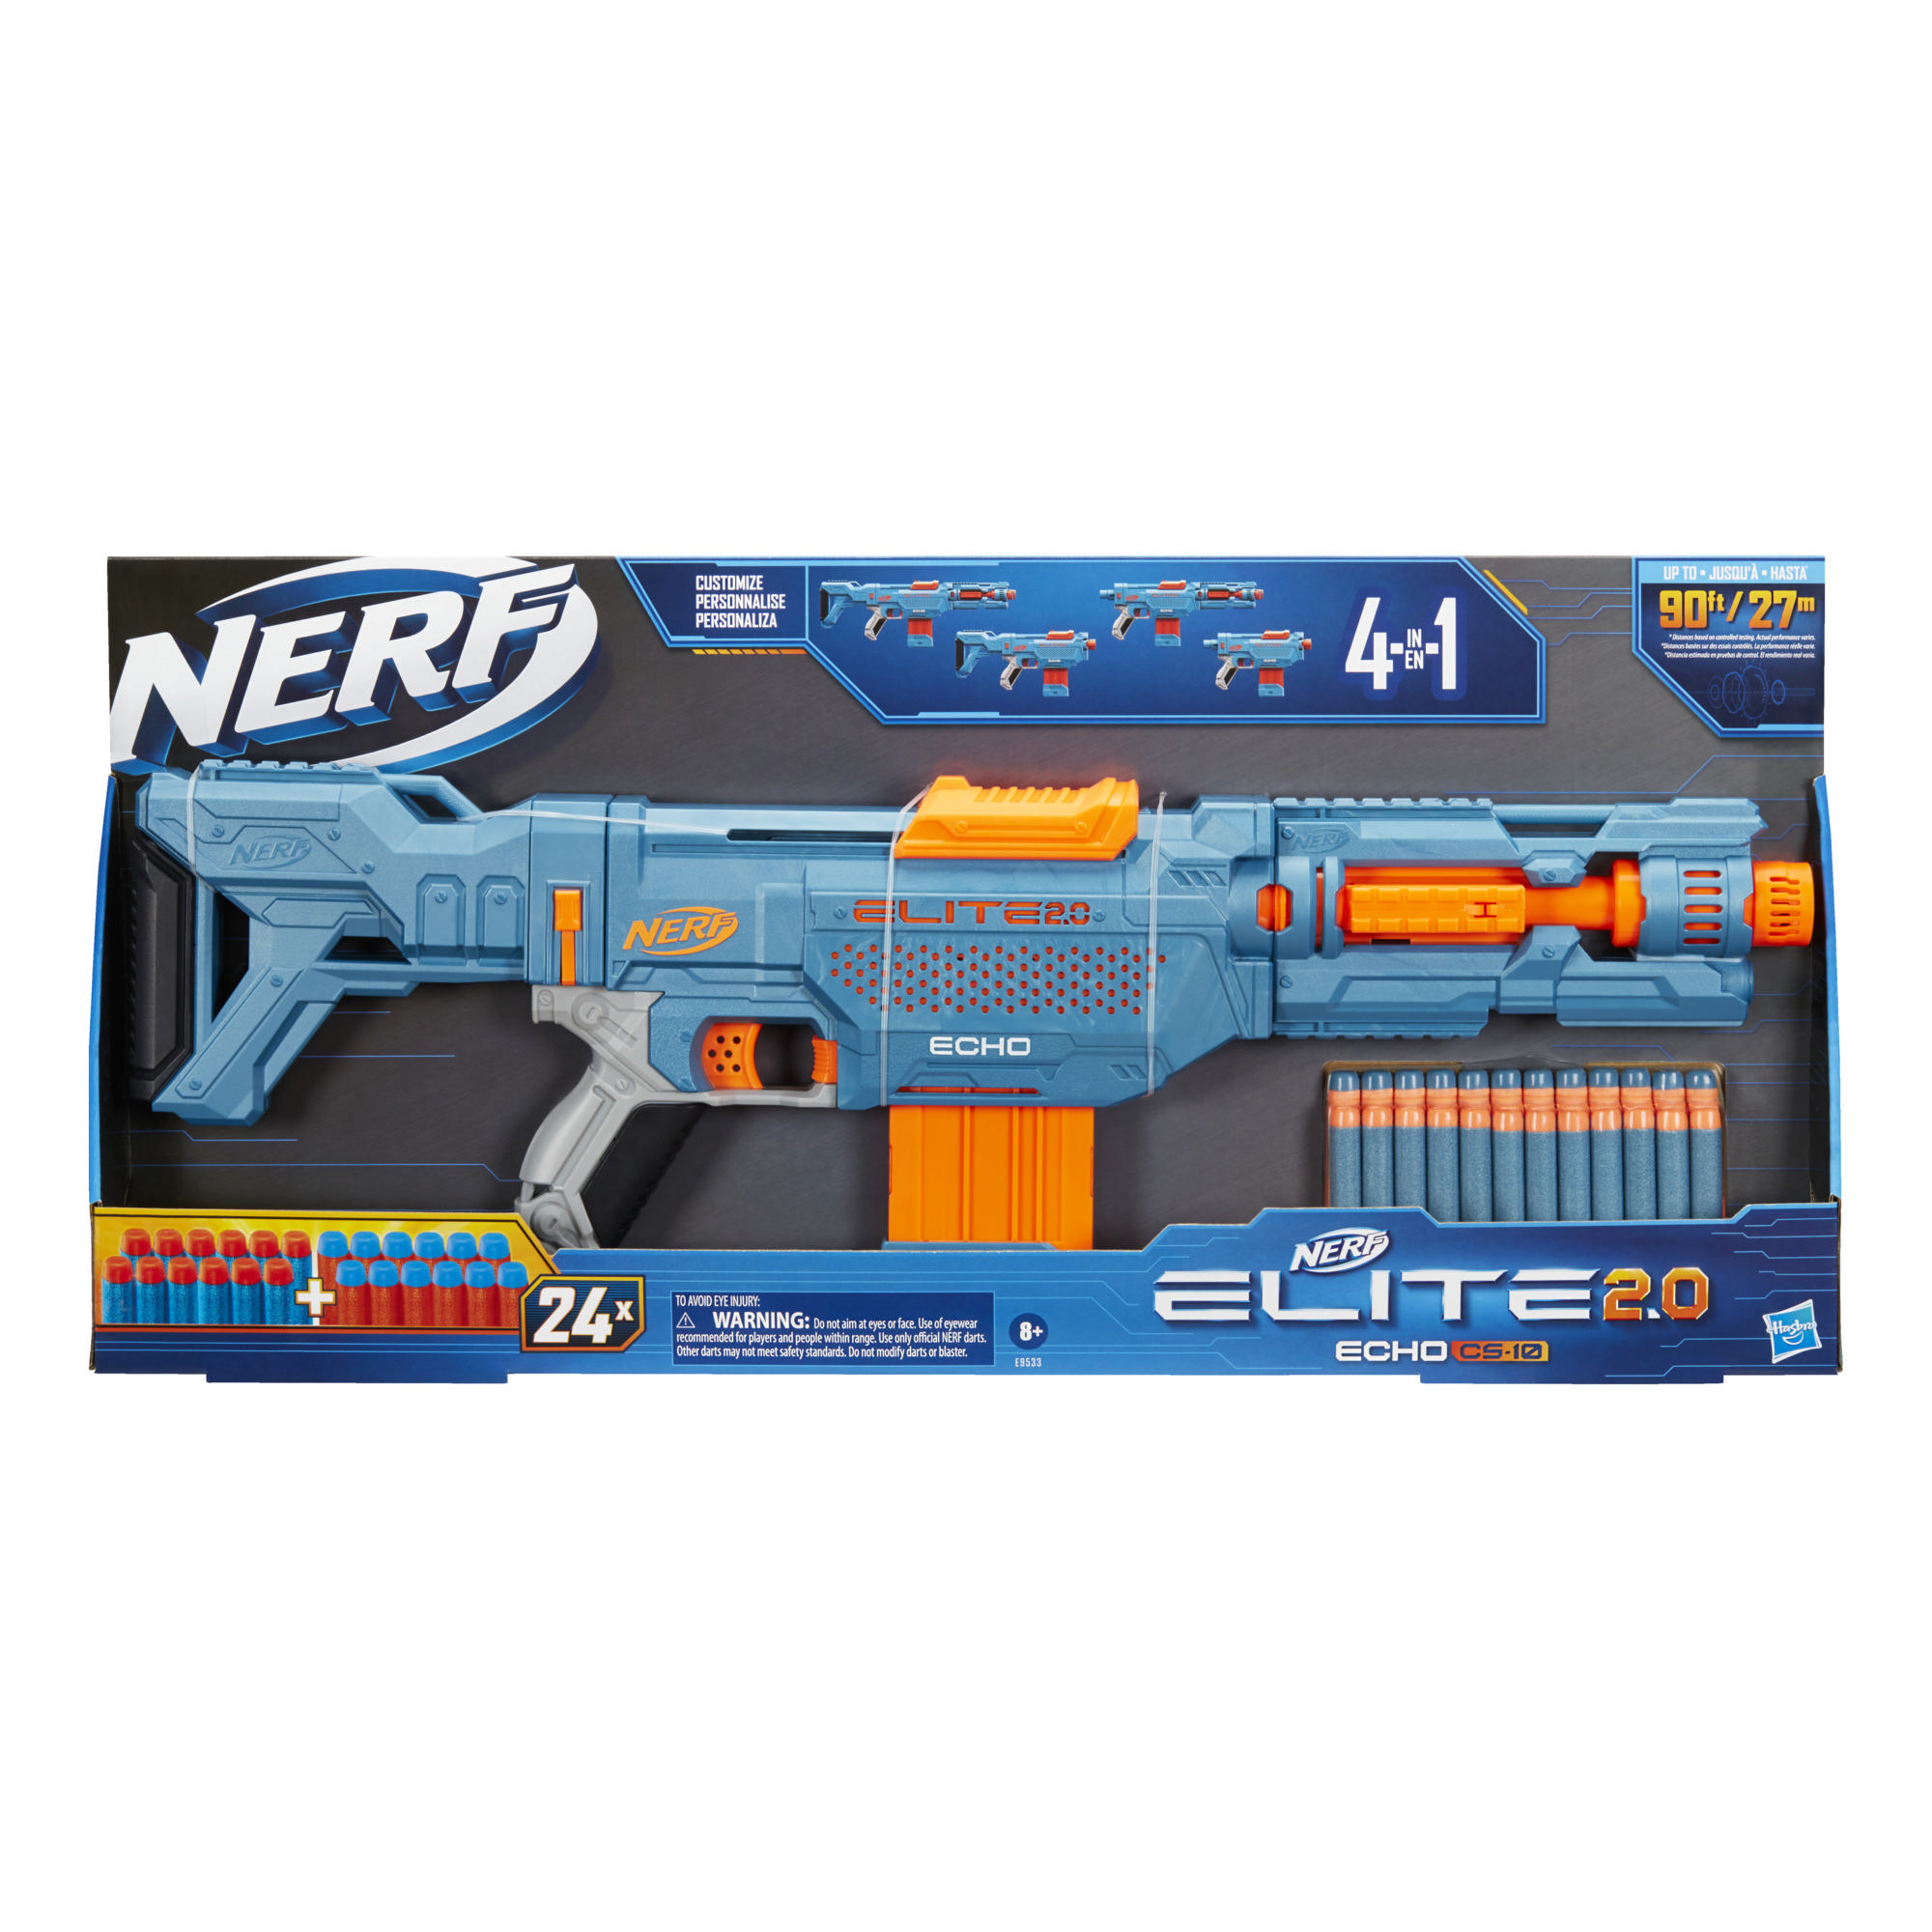 Nerf Elite 2.0 Double Punch Not Working, How to Fix Nerf Elite 2.0